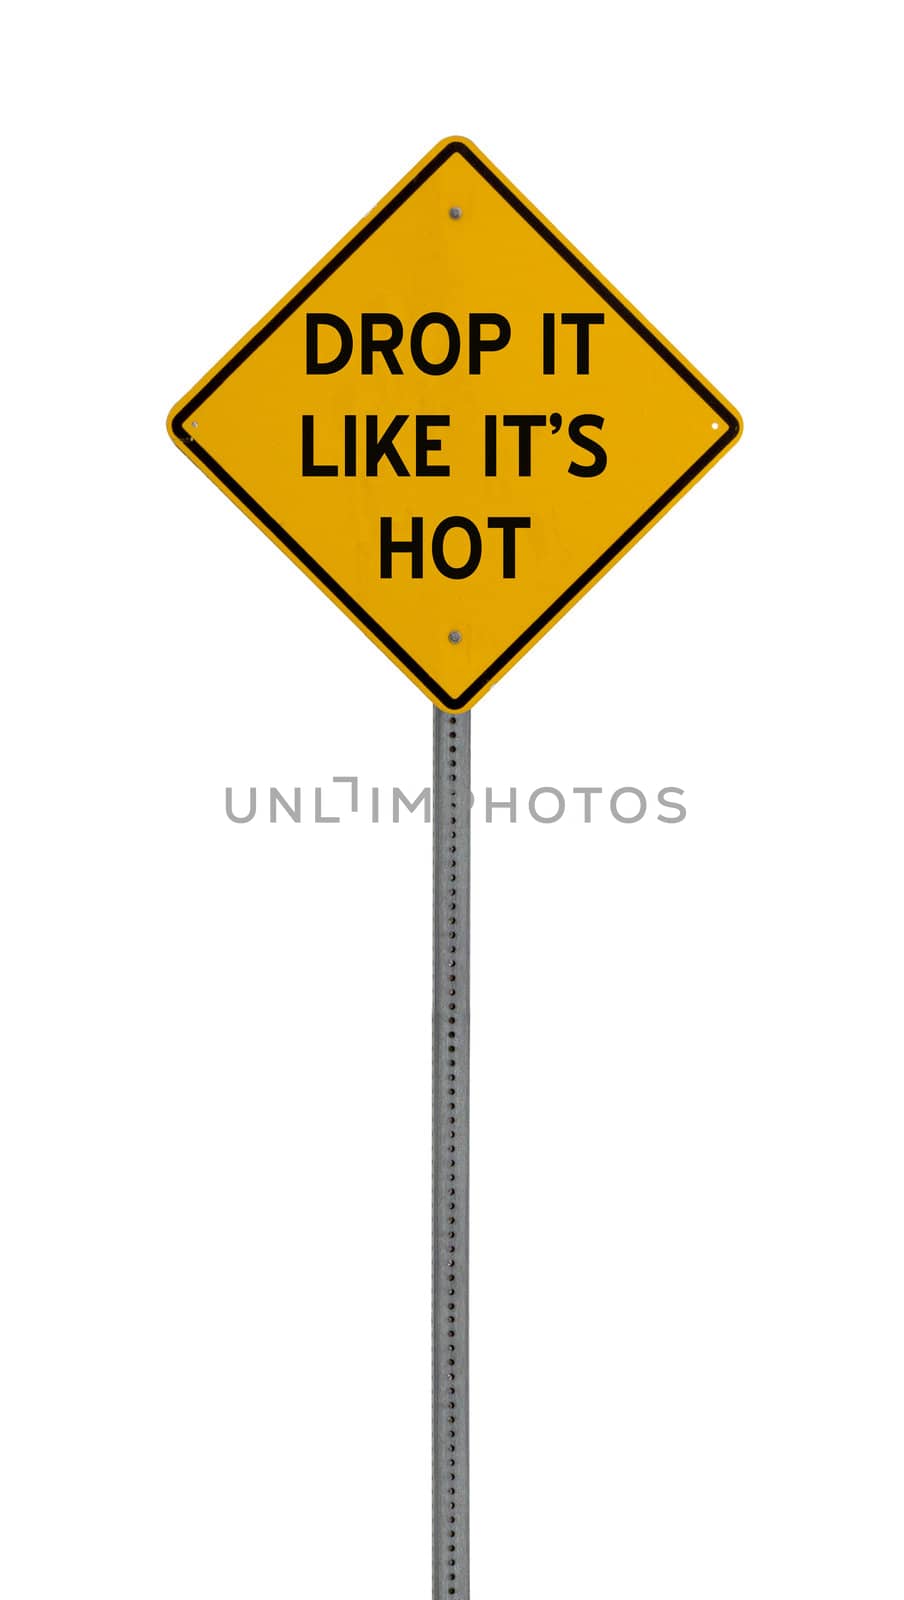  drop it like it's hot - Yellow road warning sign by jeremywhat